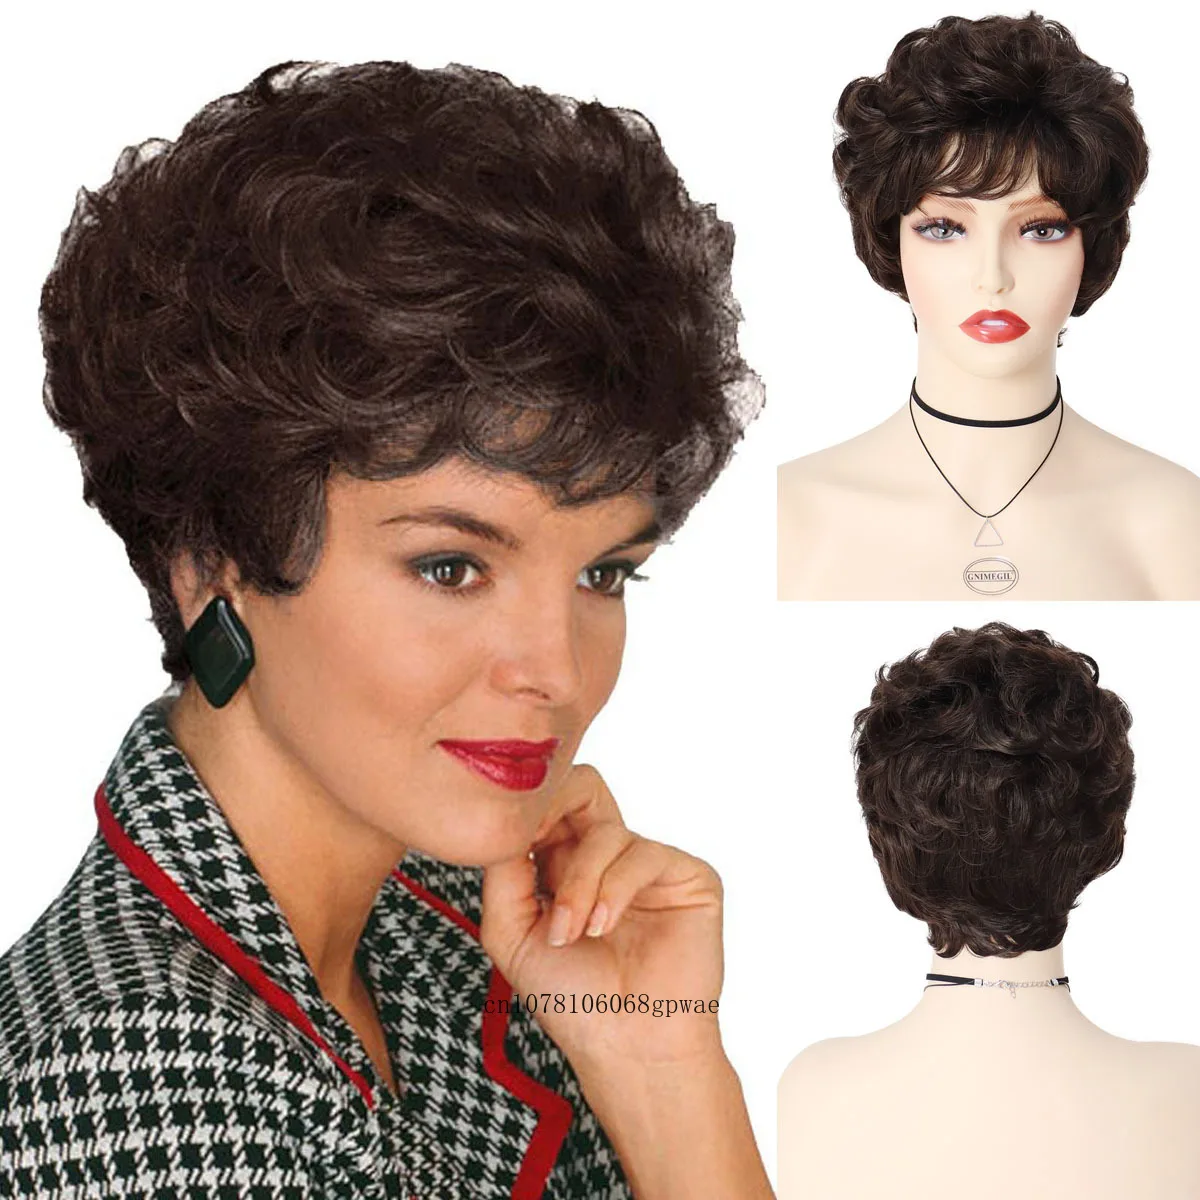 Women's Wig Short Curly Hair Dark Brown Wig with Bangs Natural Daily Fluffy Hairstyle Great Grandma Mommy Gift Wig Cosplay Party